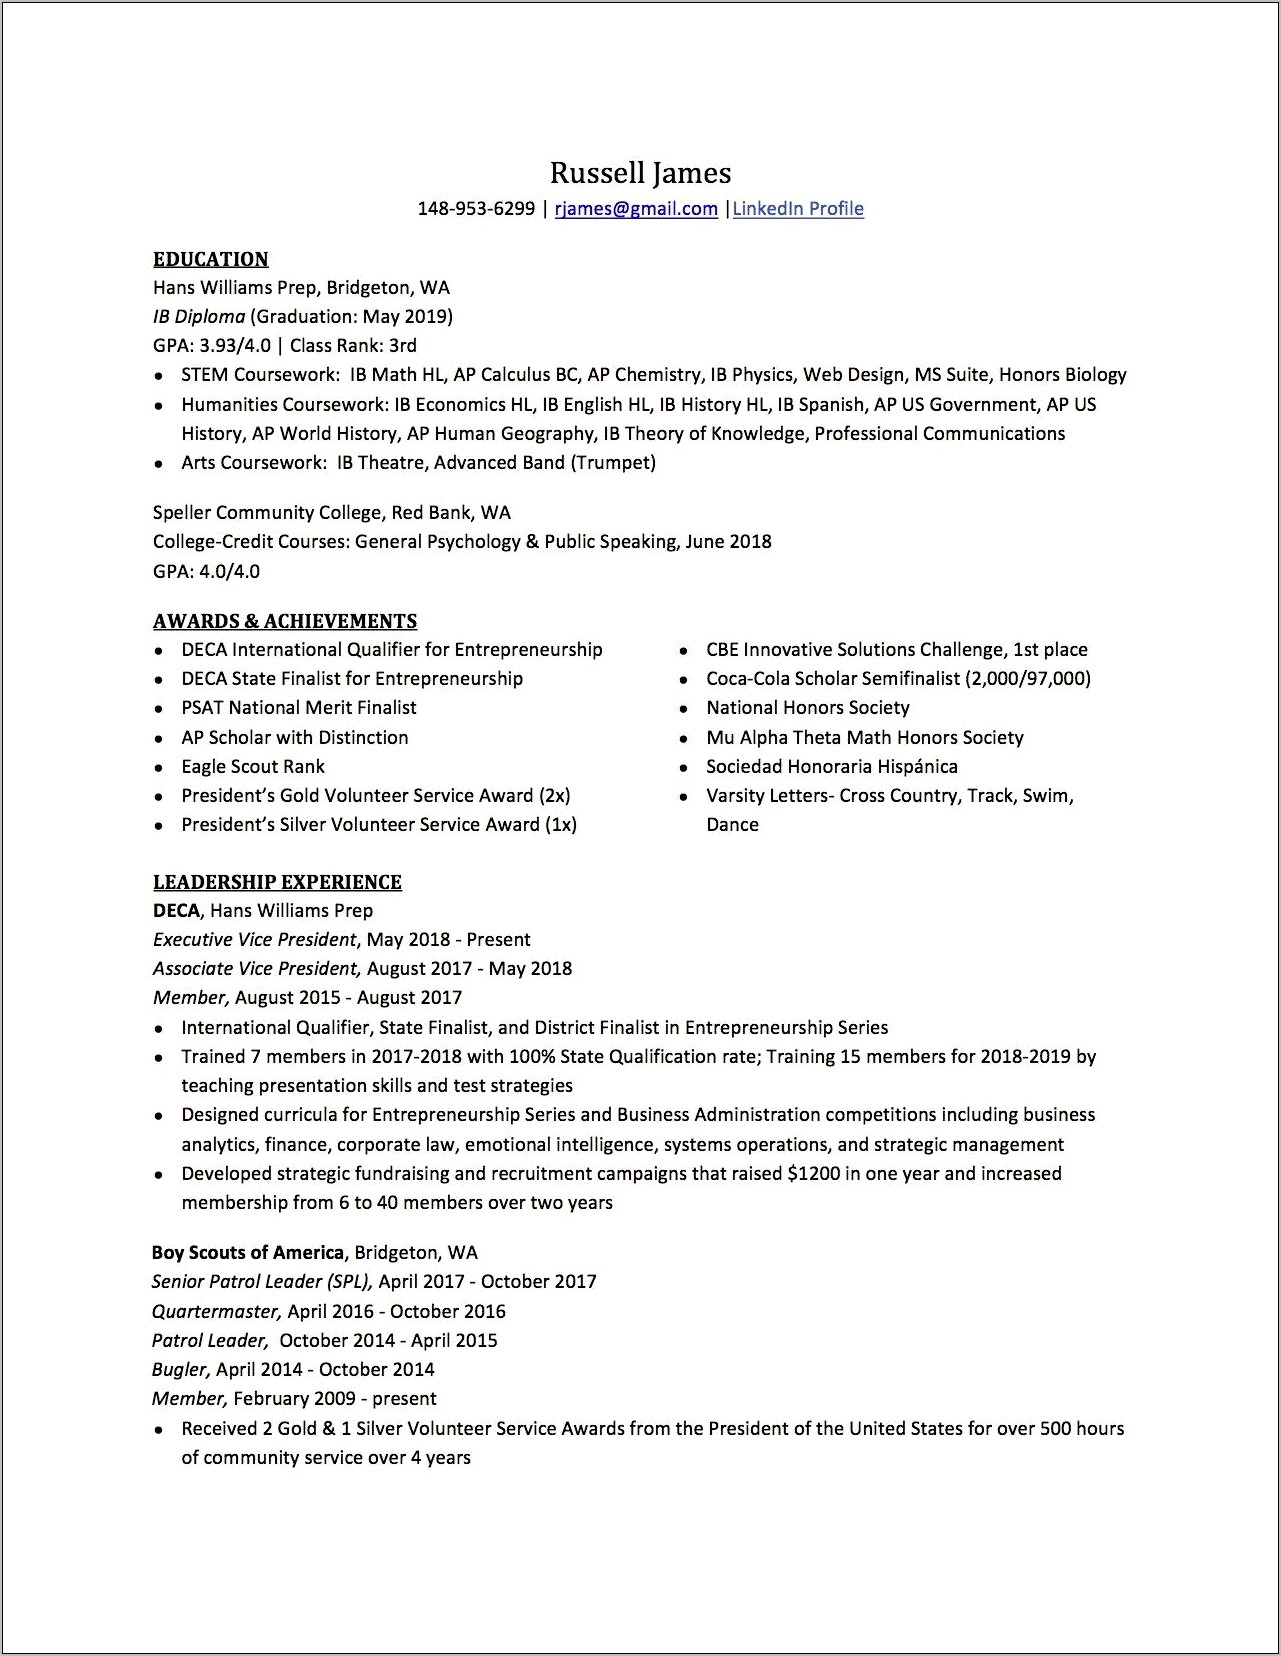 Are High School Classes Important In A Resume